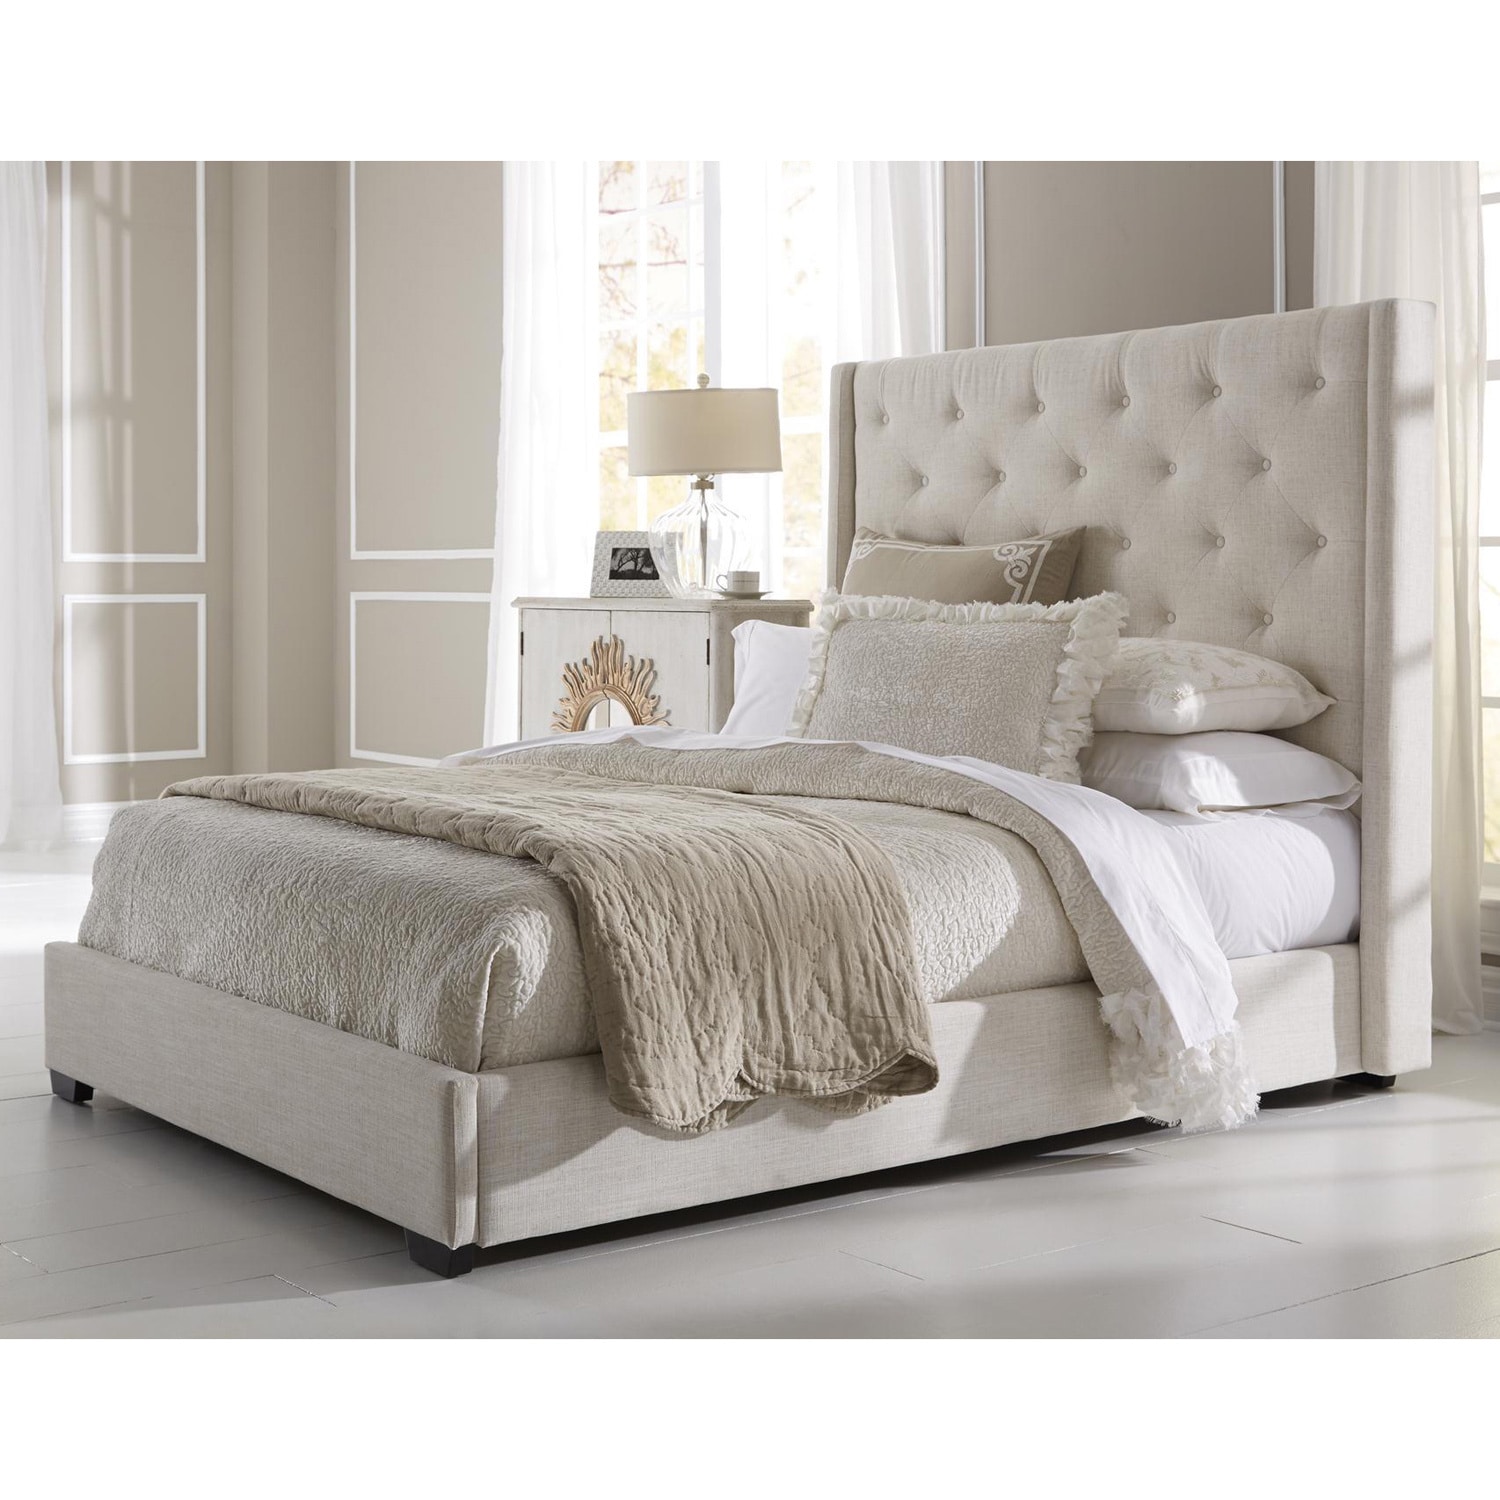 Wingback Button Tufted Cream Queen Size Upholstered Bed Overstock